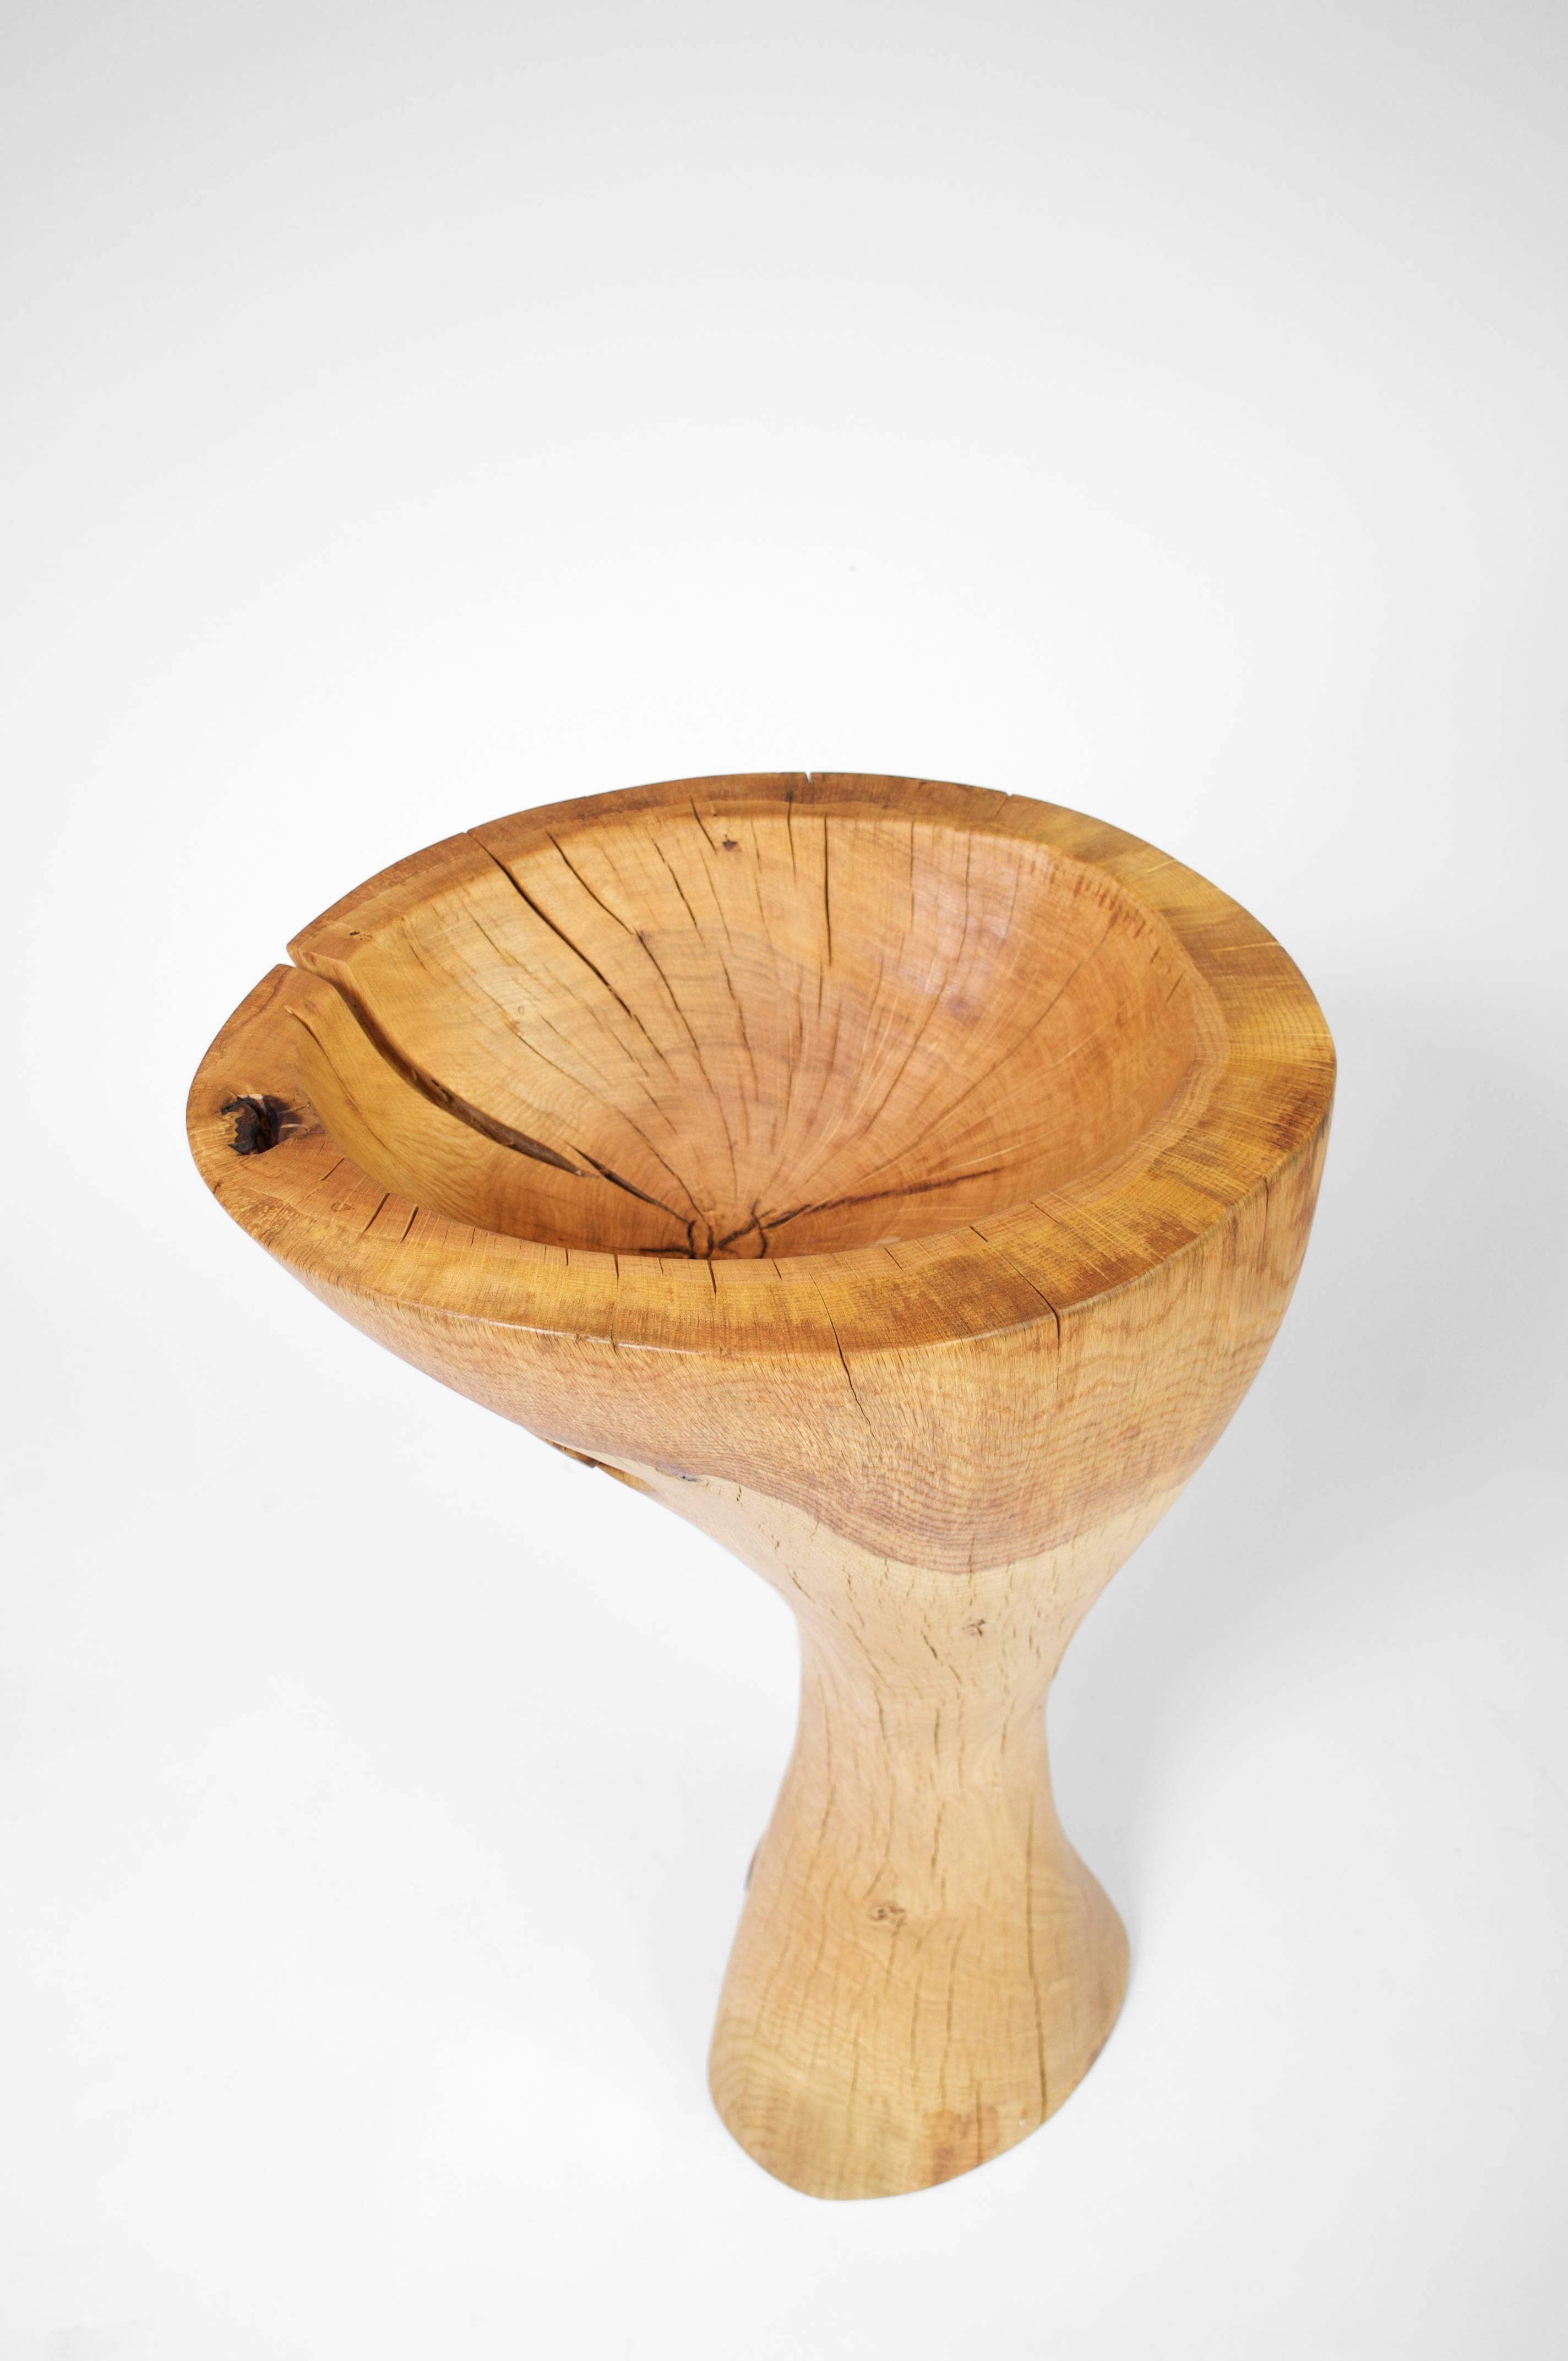 Unique signed bowl by Jörg Pietschmann
Vessel, bowl oak
Measures: H 104 x W 47 x D 53 cm
Bowl sculpture carved from a large tree branch.
Polished oil finish.

In Pietschmann’s sculptures, trees that for centuries were part of a landscape and